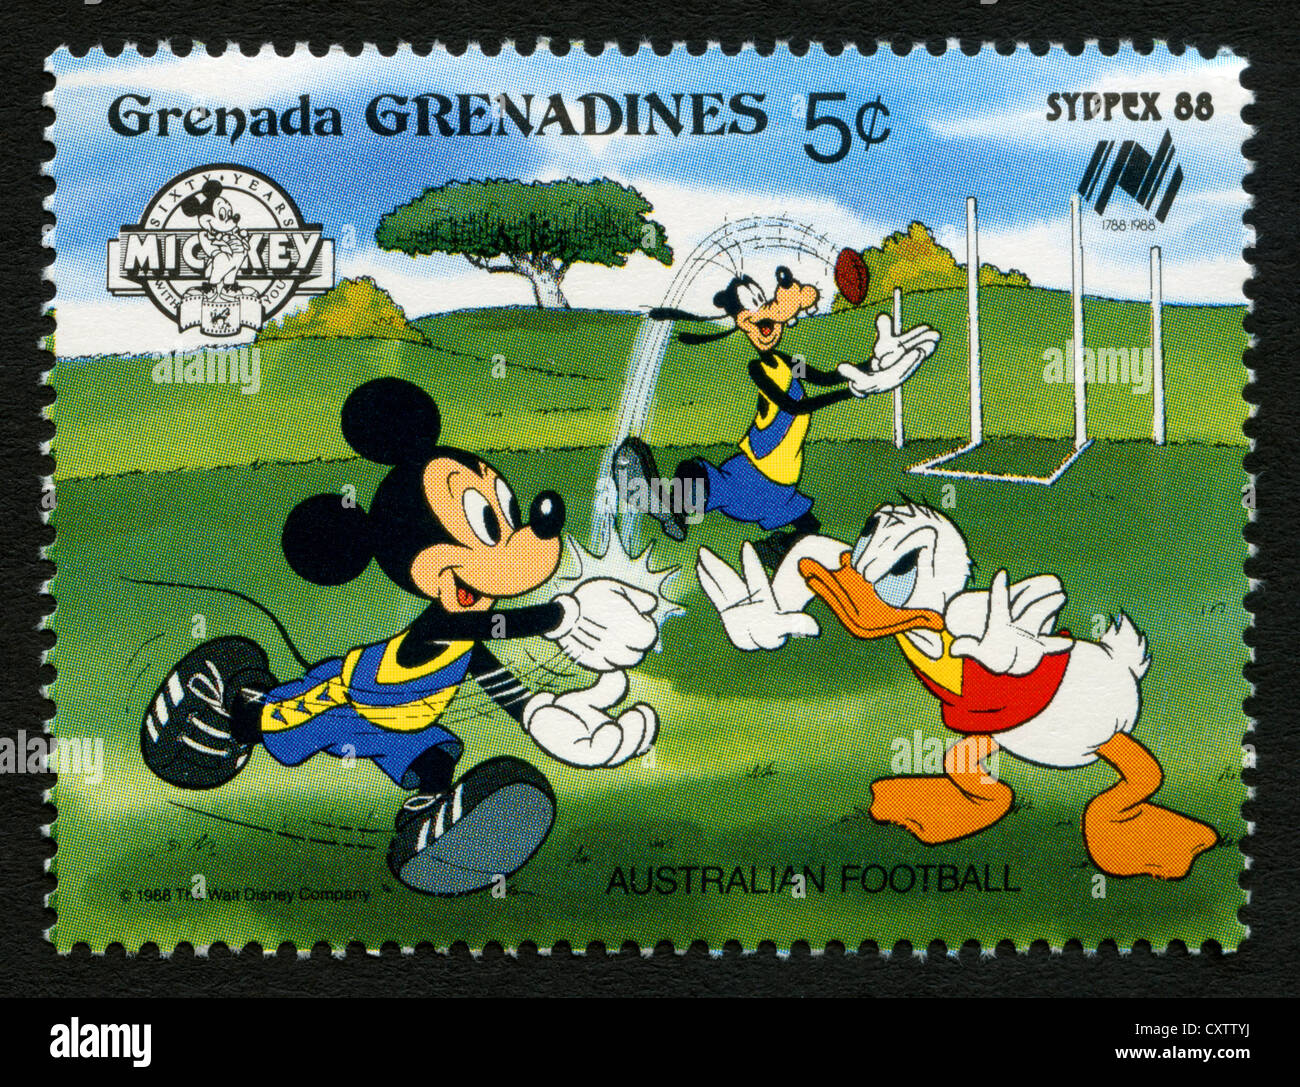 Grenada postage stamp - Disney cartoon characters - Mickey Mouse, Goofy and Donald Duck playing Australian football Stock Photo